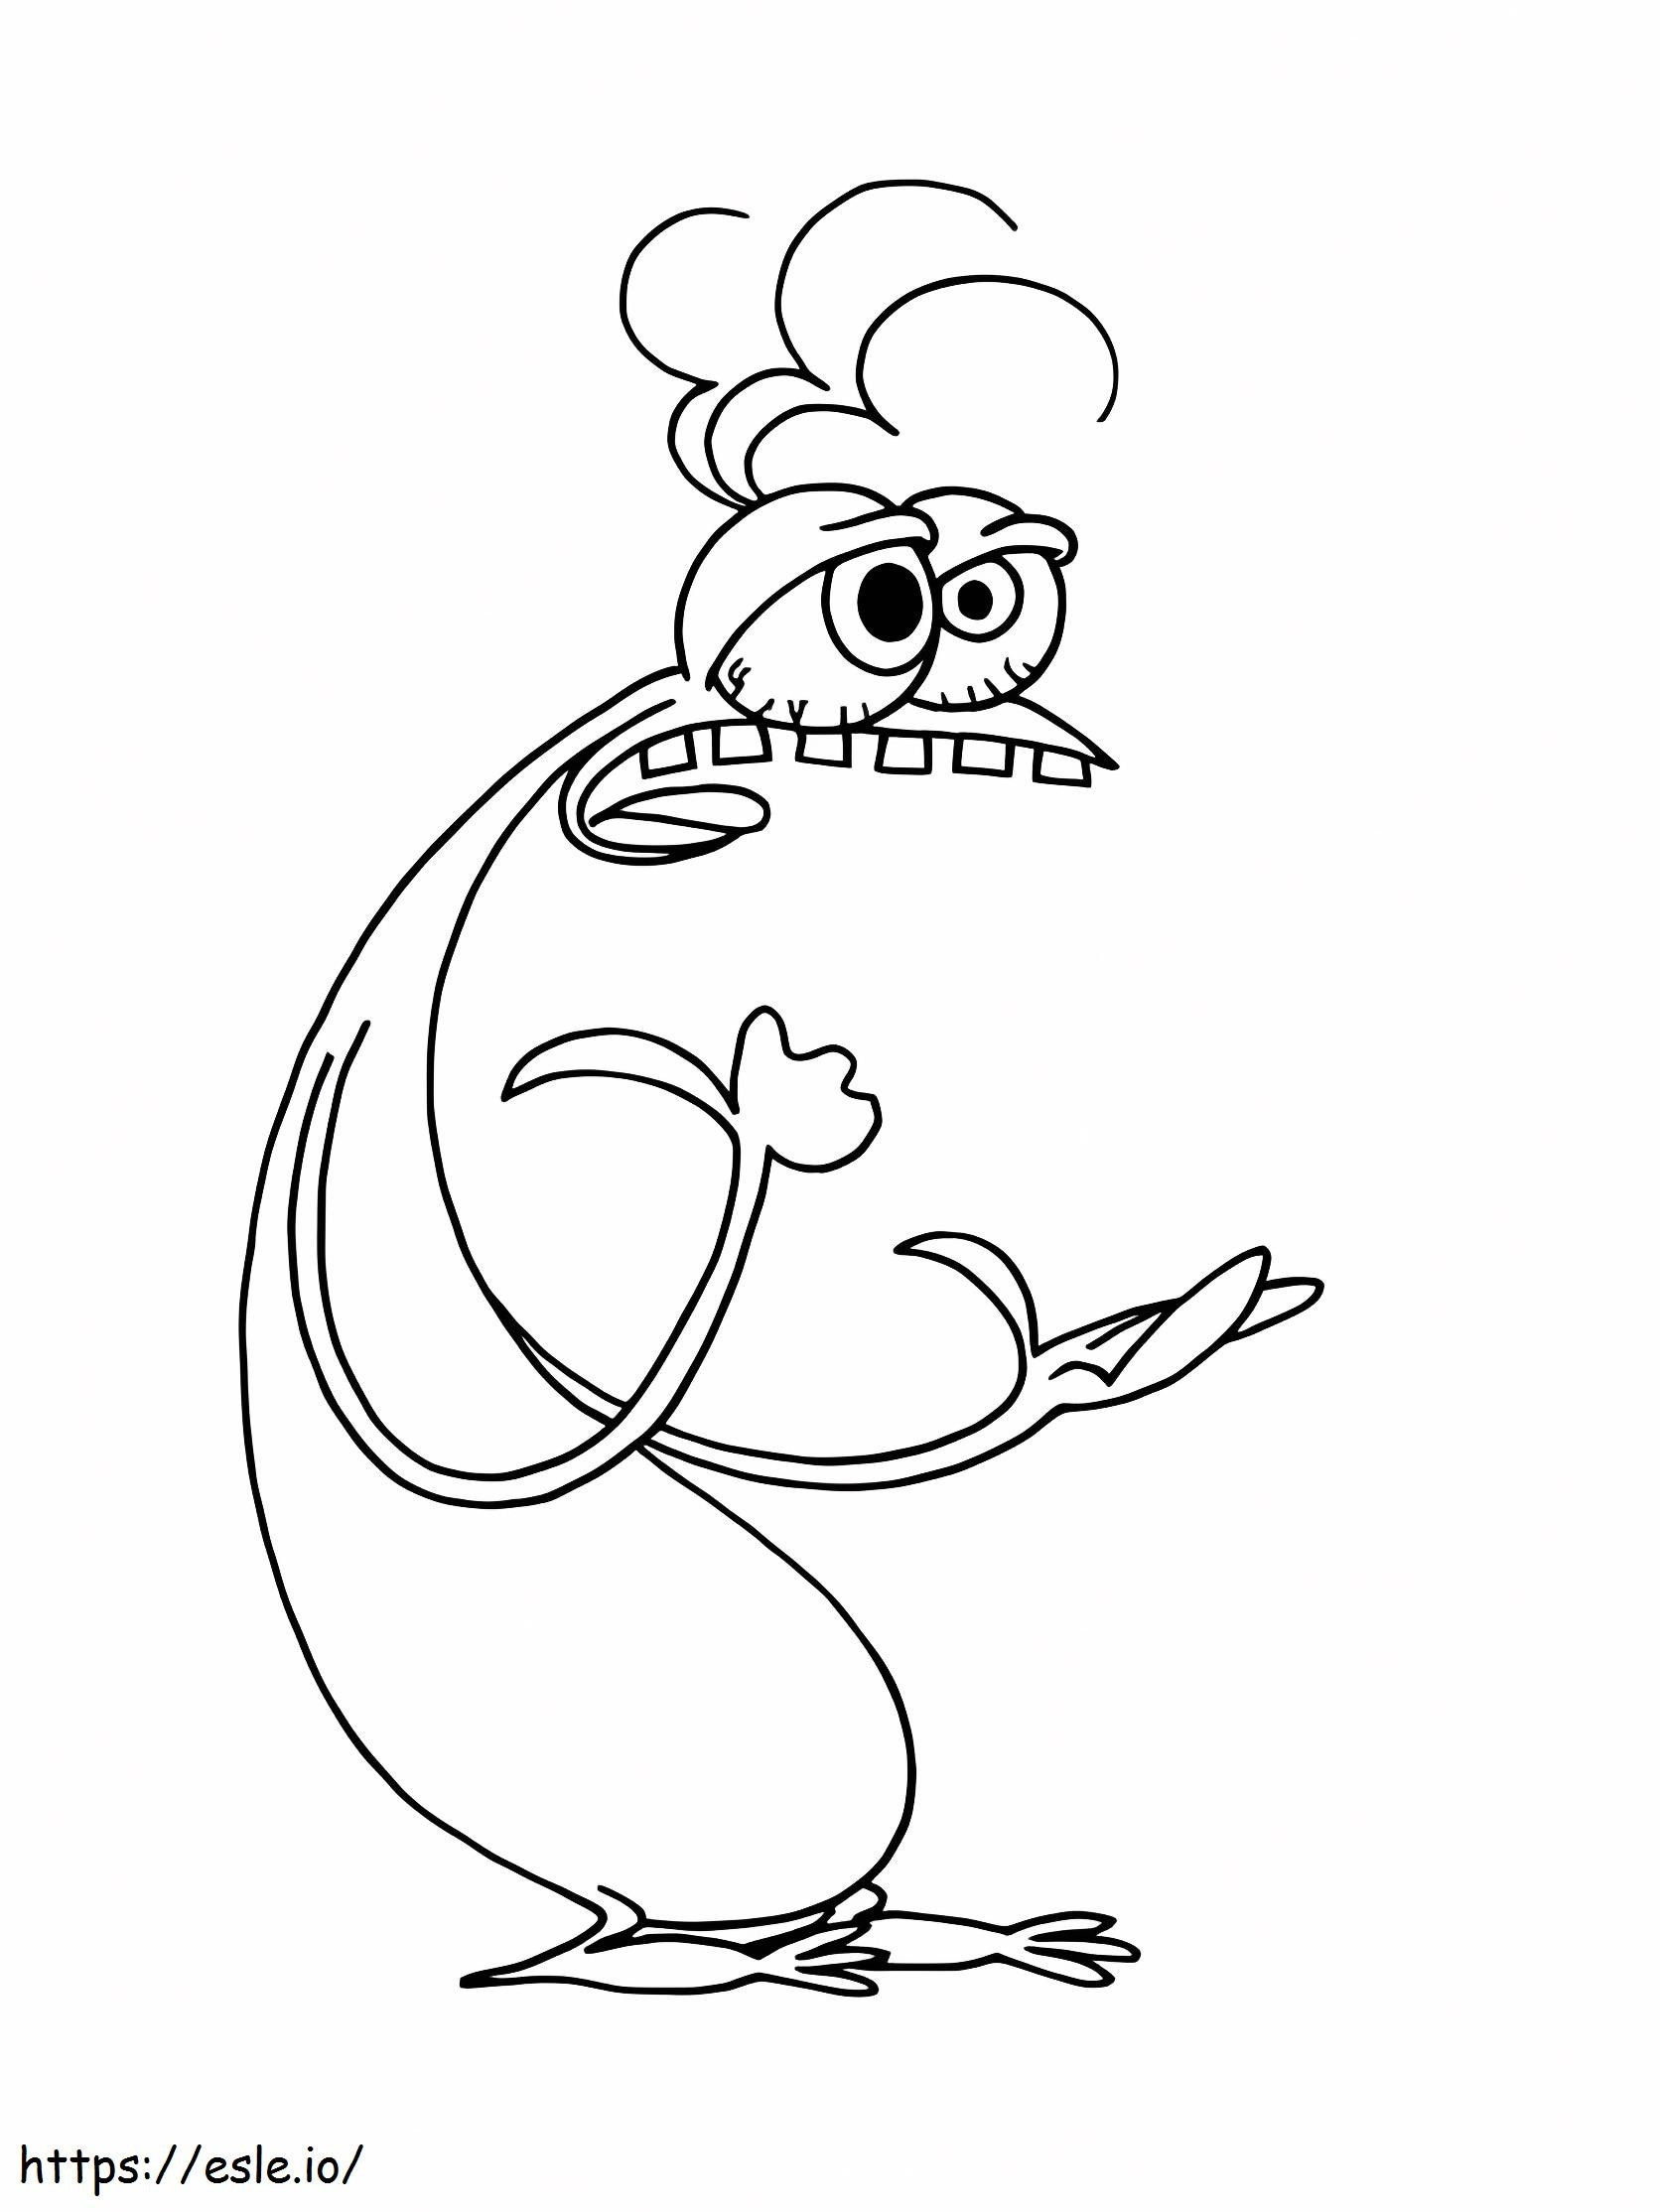 Space Goofs Bud Budiovitch coloring page